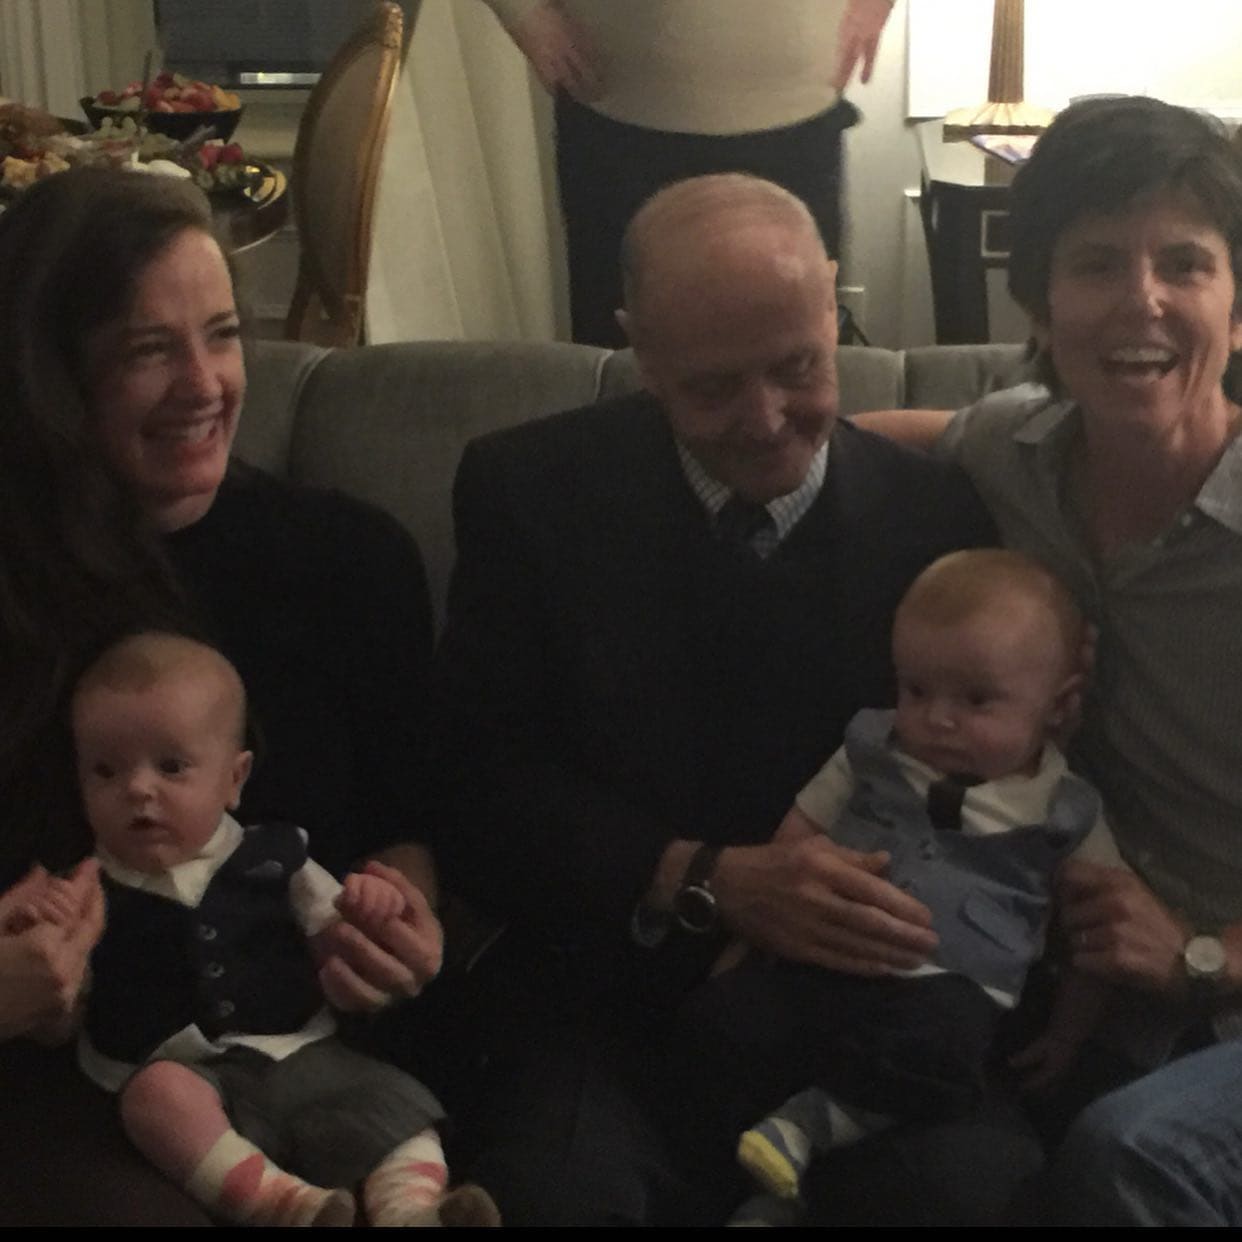 Tig Notaro's family and her